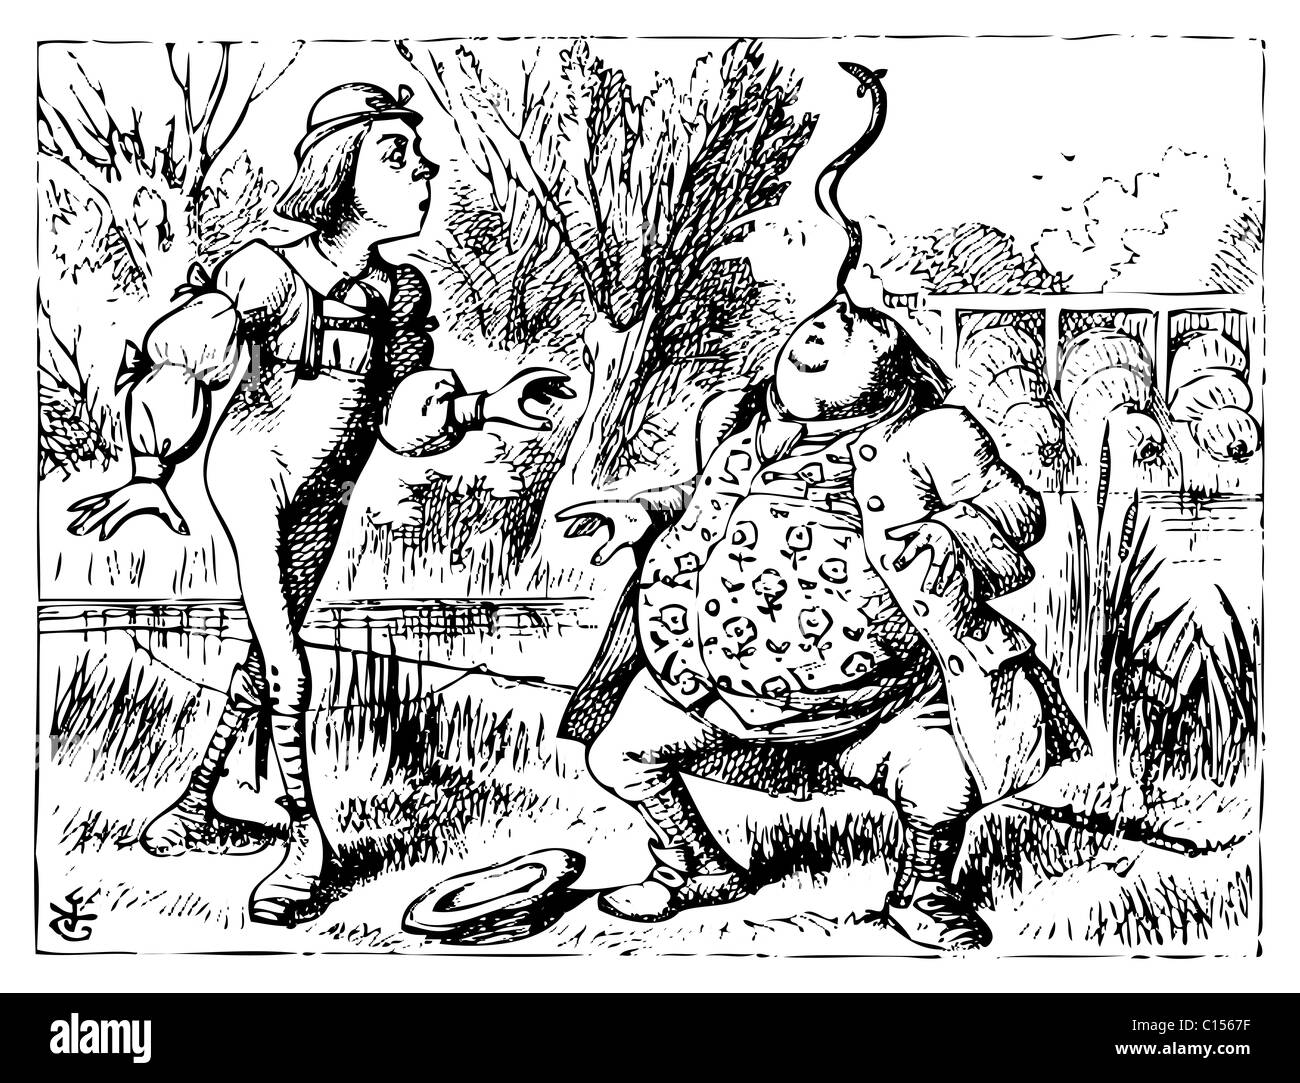 Alice in Wonderland old illustration engraving. Father William balancing eel on his nose: Alice's Adventures in Wonderland. Stock Photo